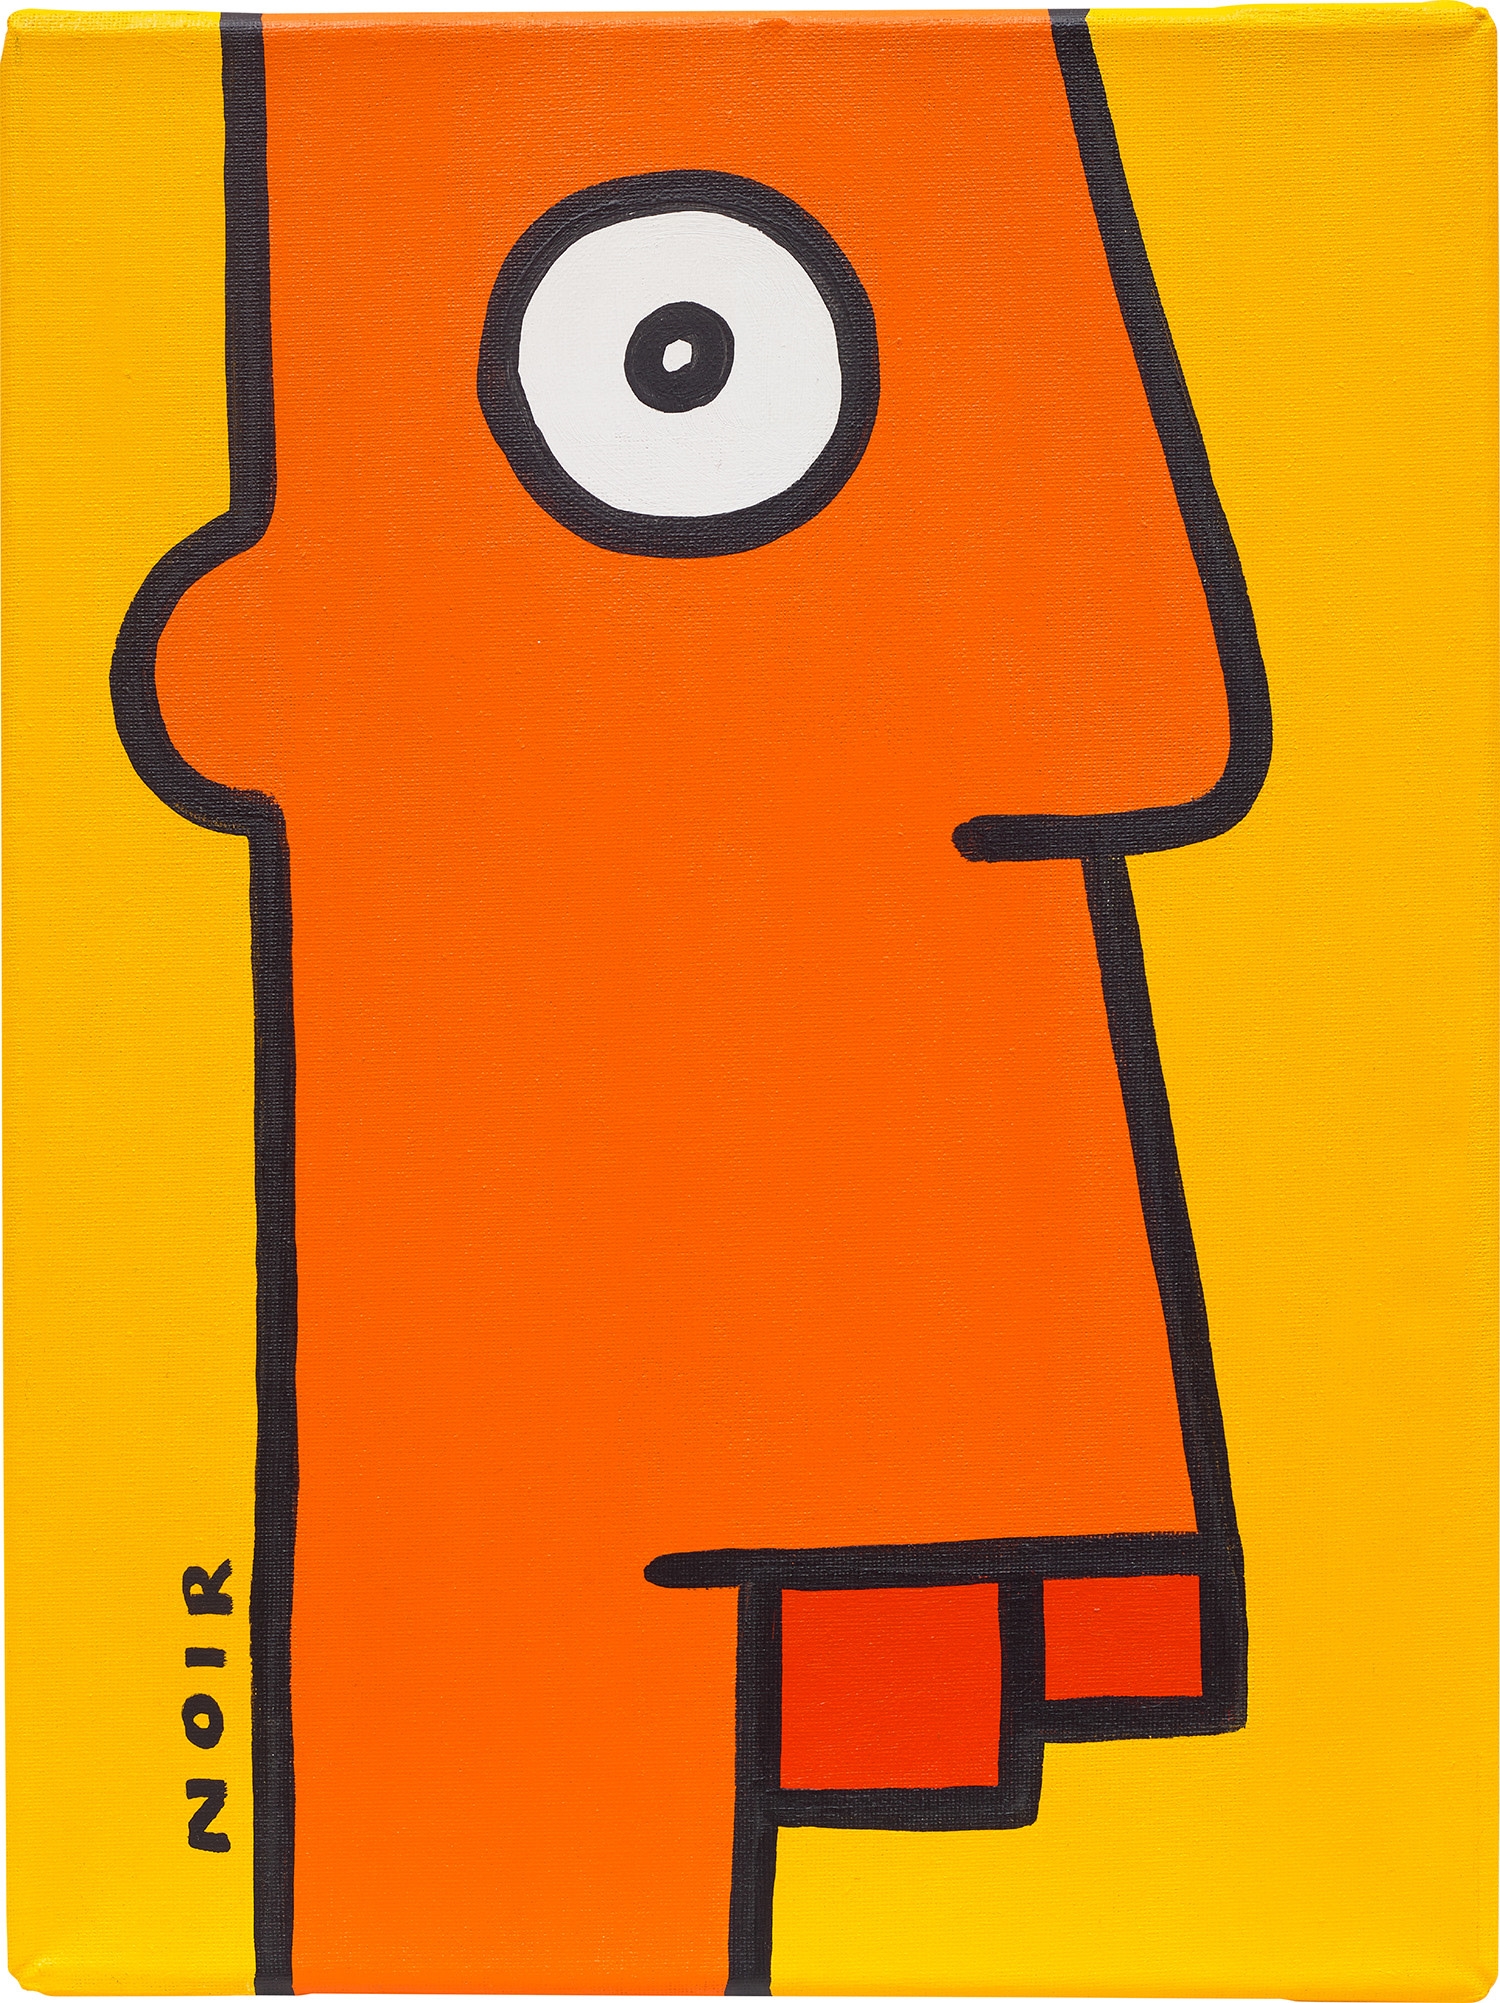 Artwork by Thierry Noir, Two works: (i) Ich Schwitze Ungern Deshalb Ganz Ruhig!; (ii) I Think About Something Hou La La It Is So Important I Have To Write It Down Immediately, Made of acrylic on canvas